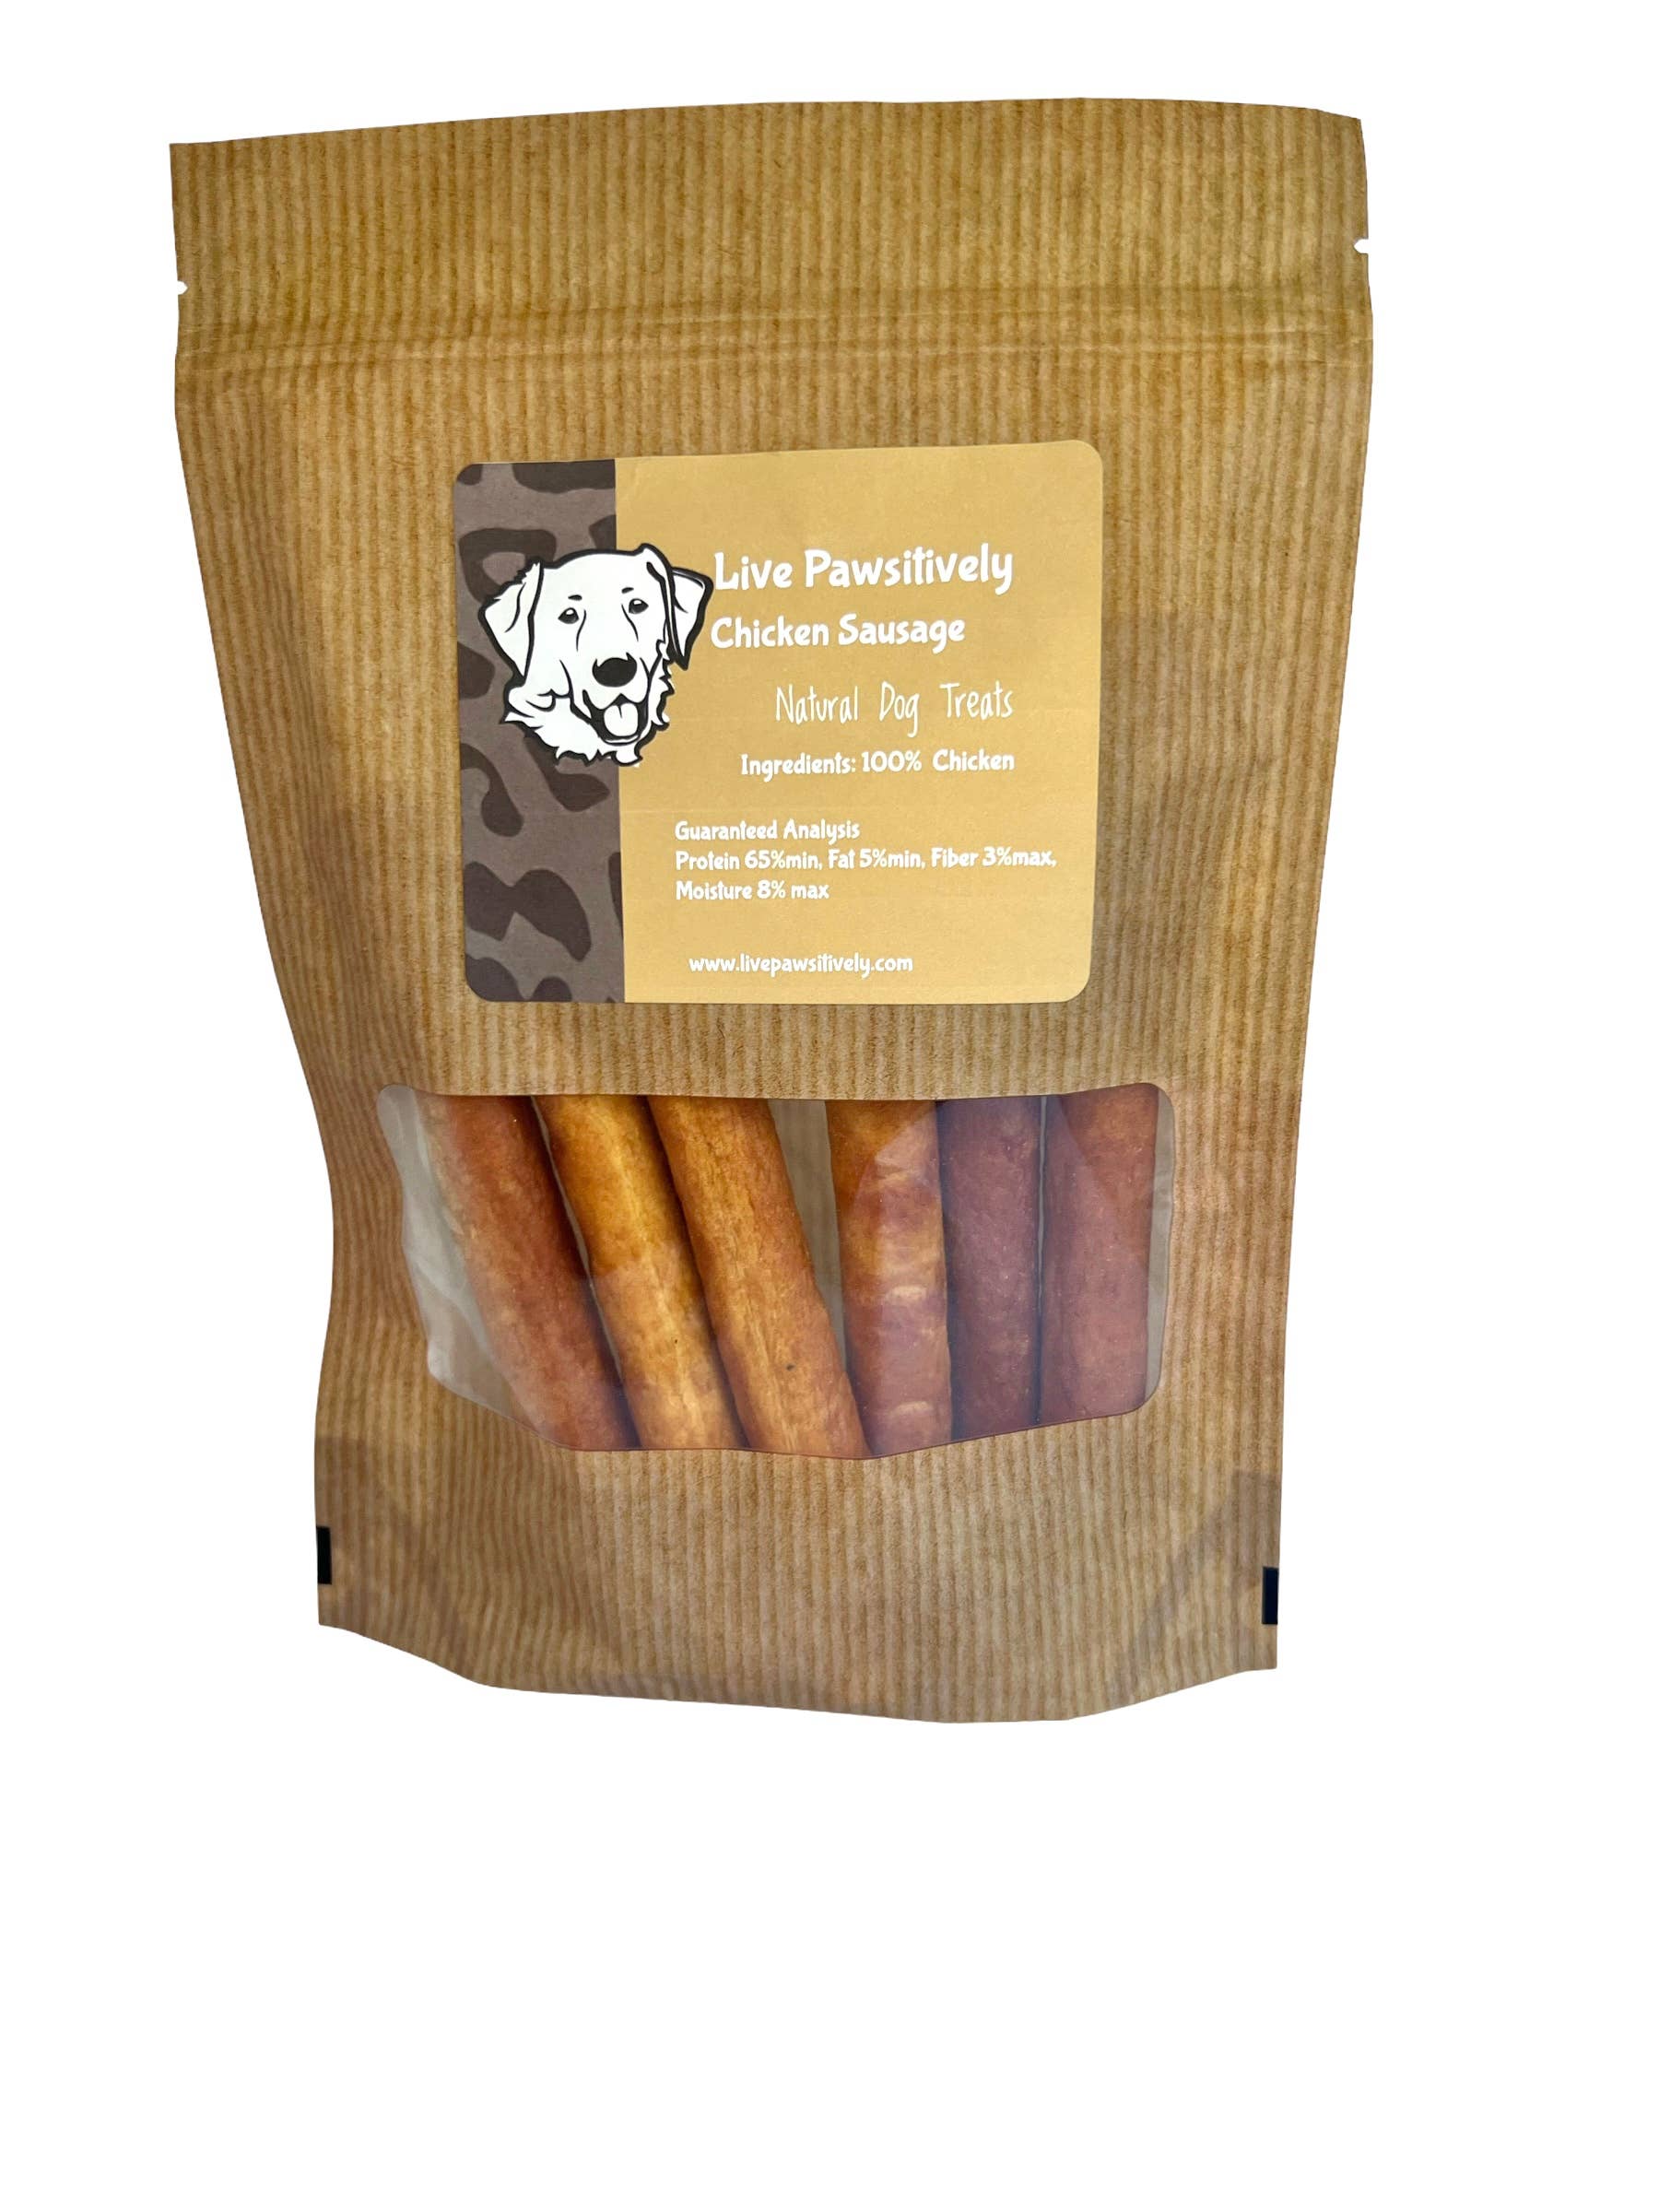 Live Pawsitive - Chicken Sausage for Dogs, Single ingredient treat, 6 per pkg